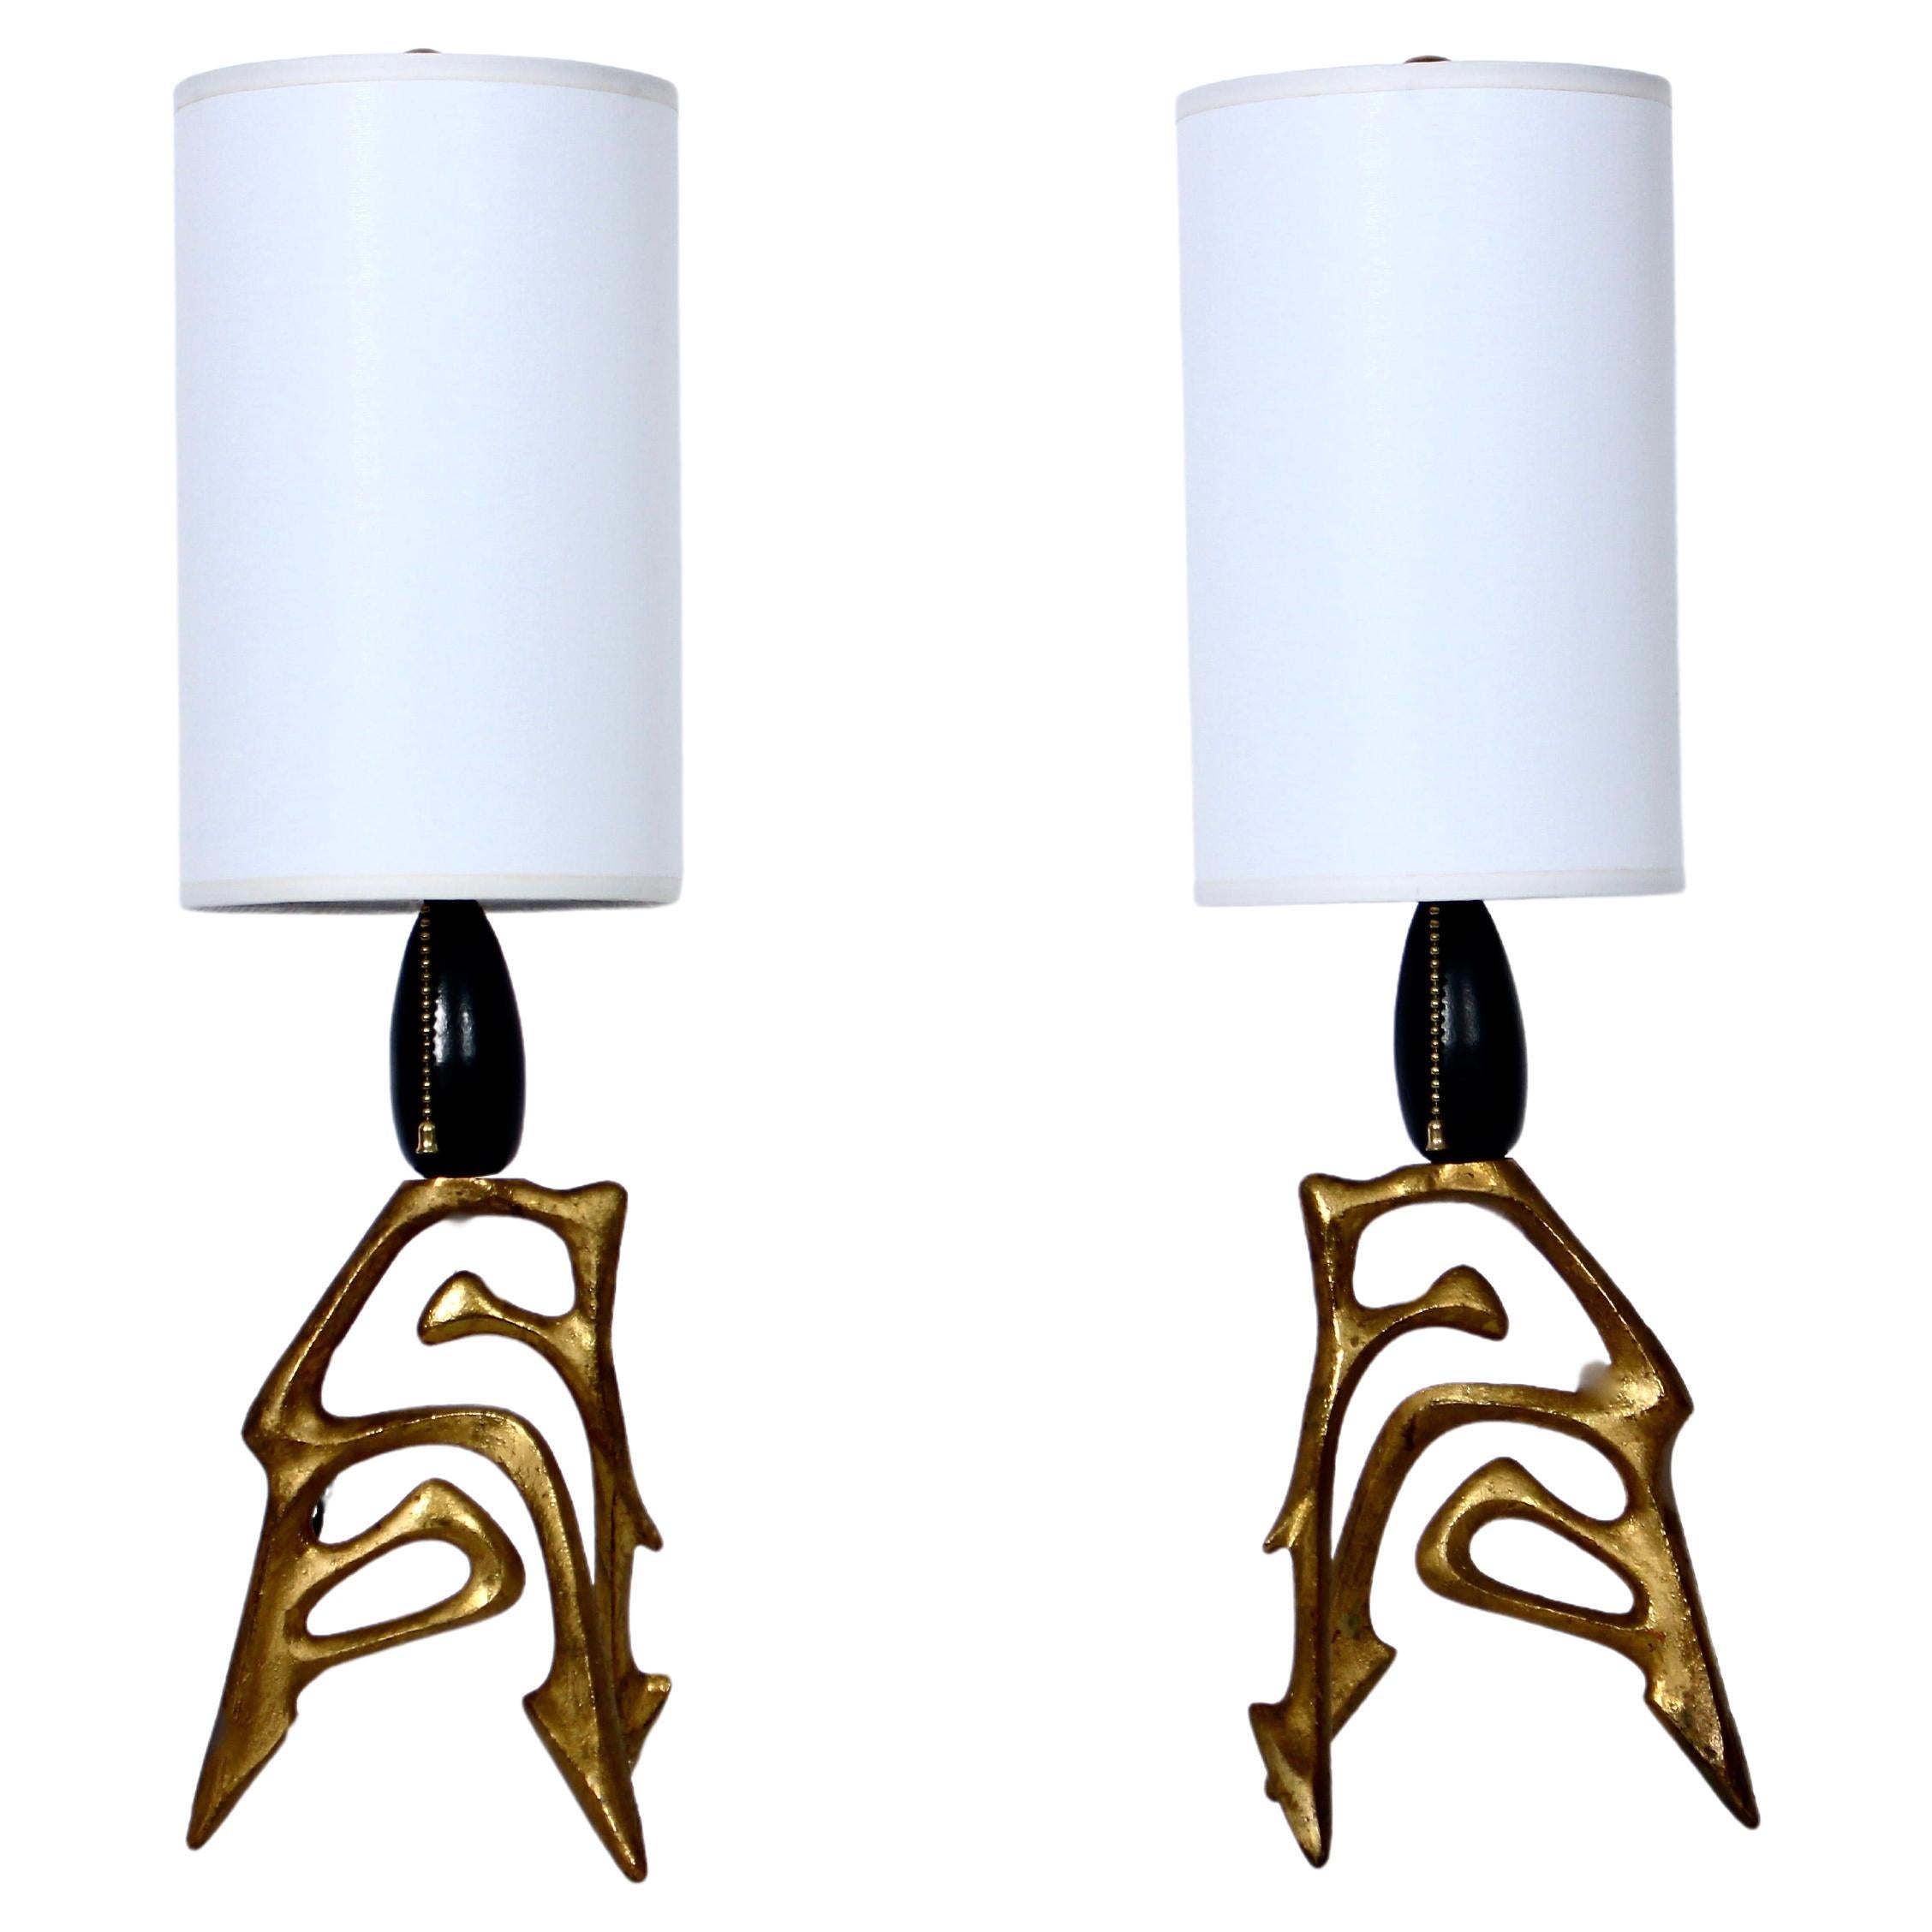 Pair of Frederic Weinberg Abstract Figurative Bronze Table Lamps, C. 1950  For Sale